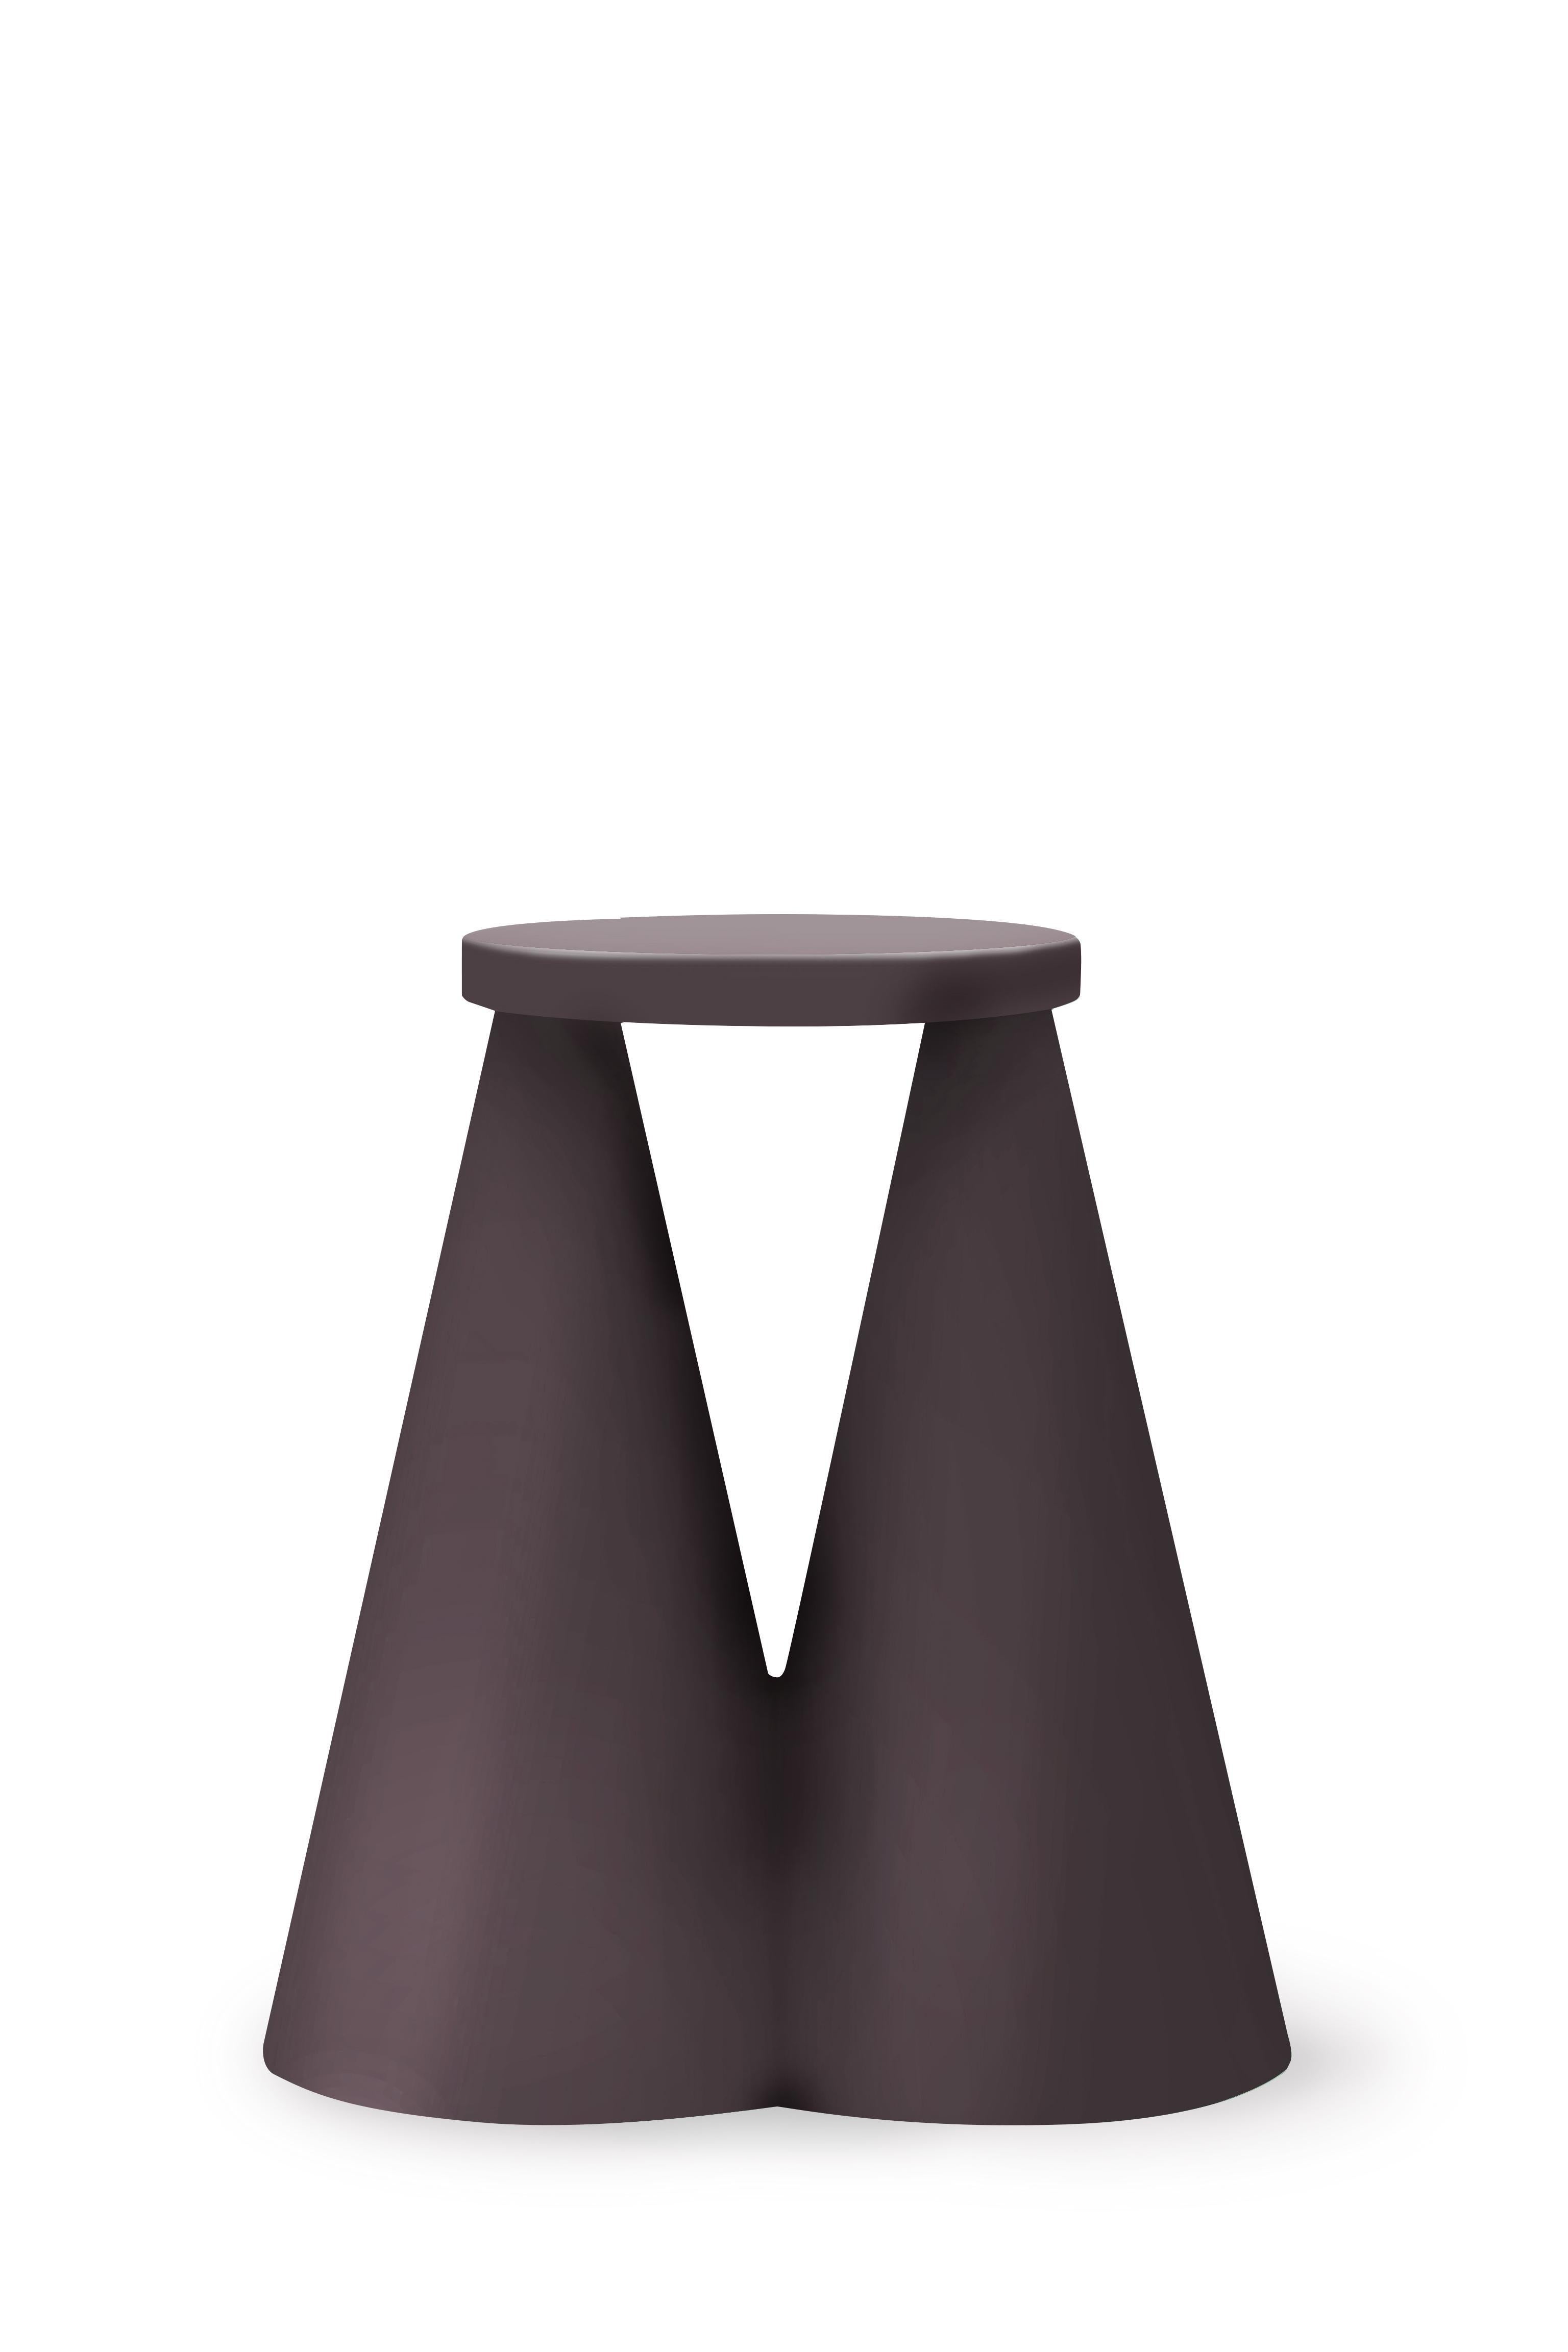 Modern Isola Side Table by Cara Davide